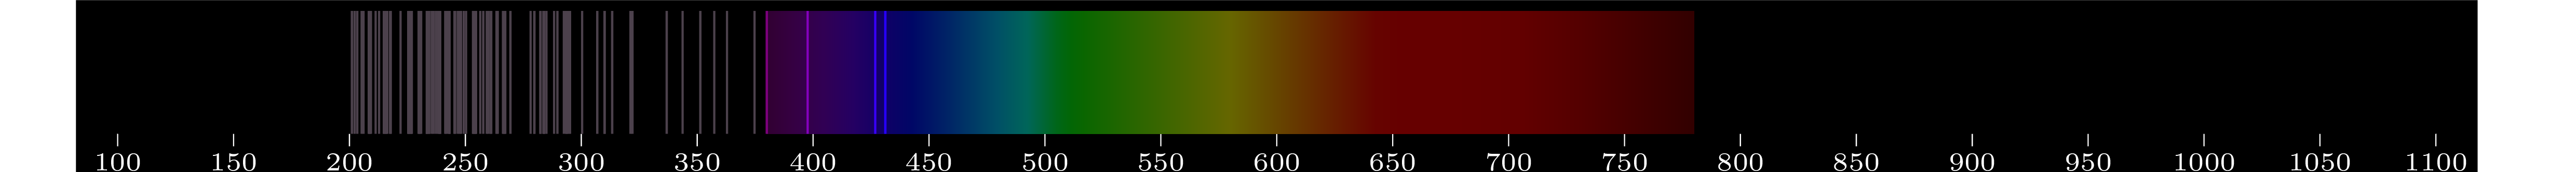 emmision spectra of element Ir